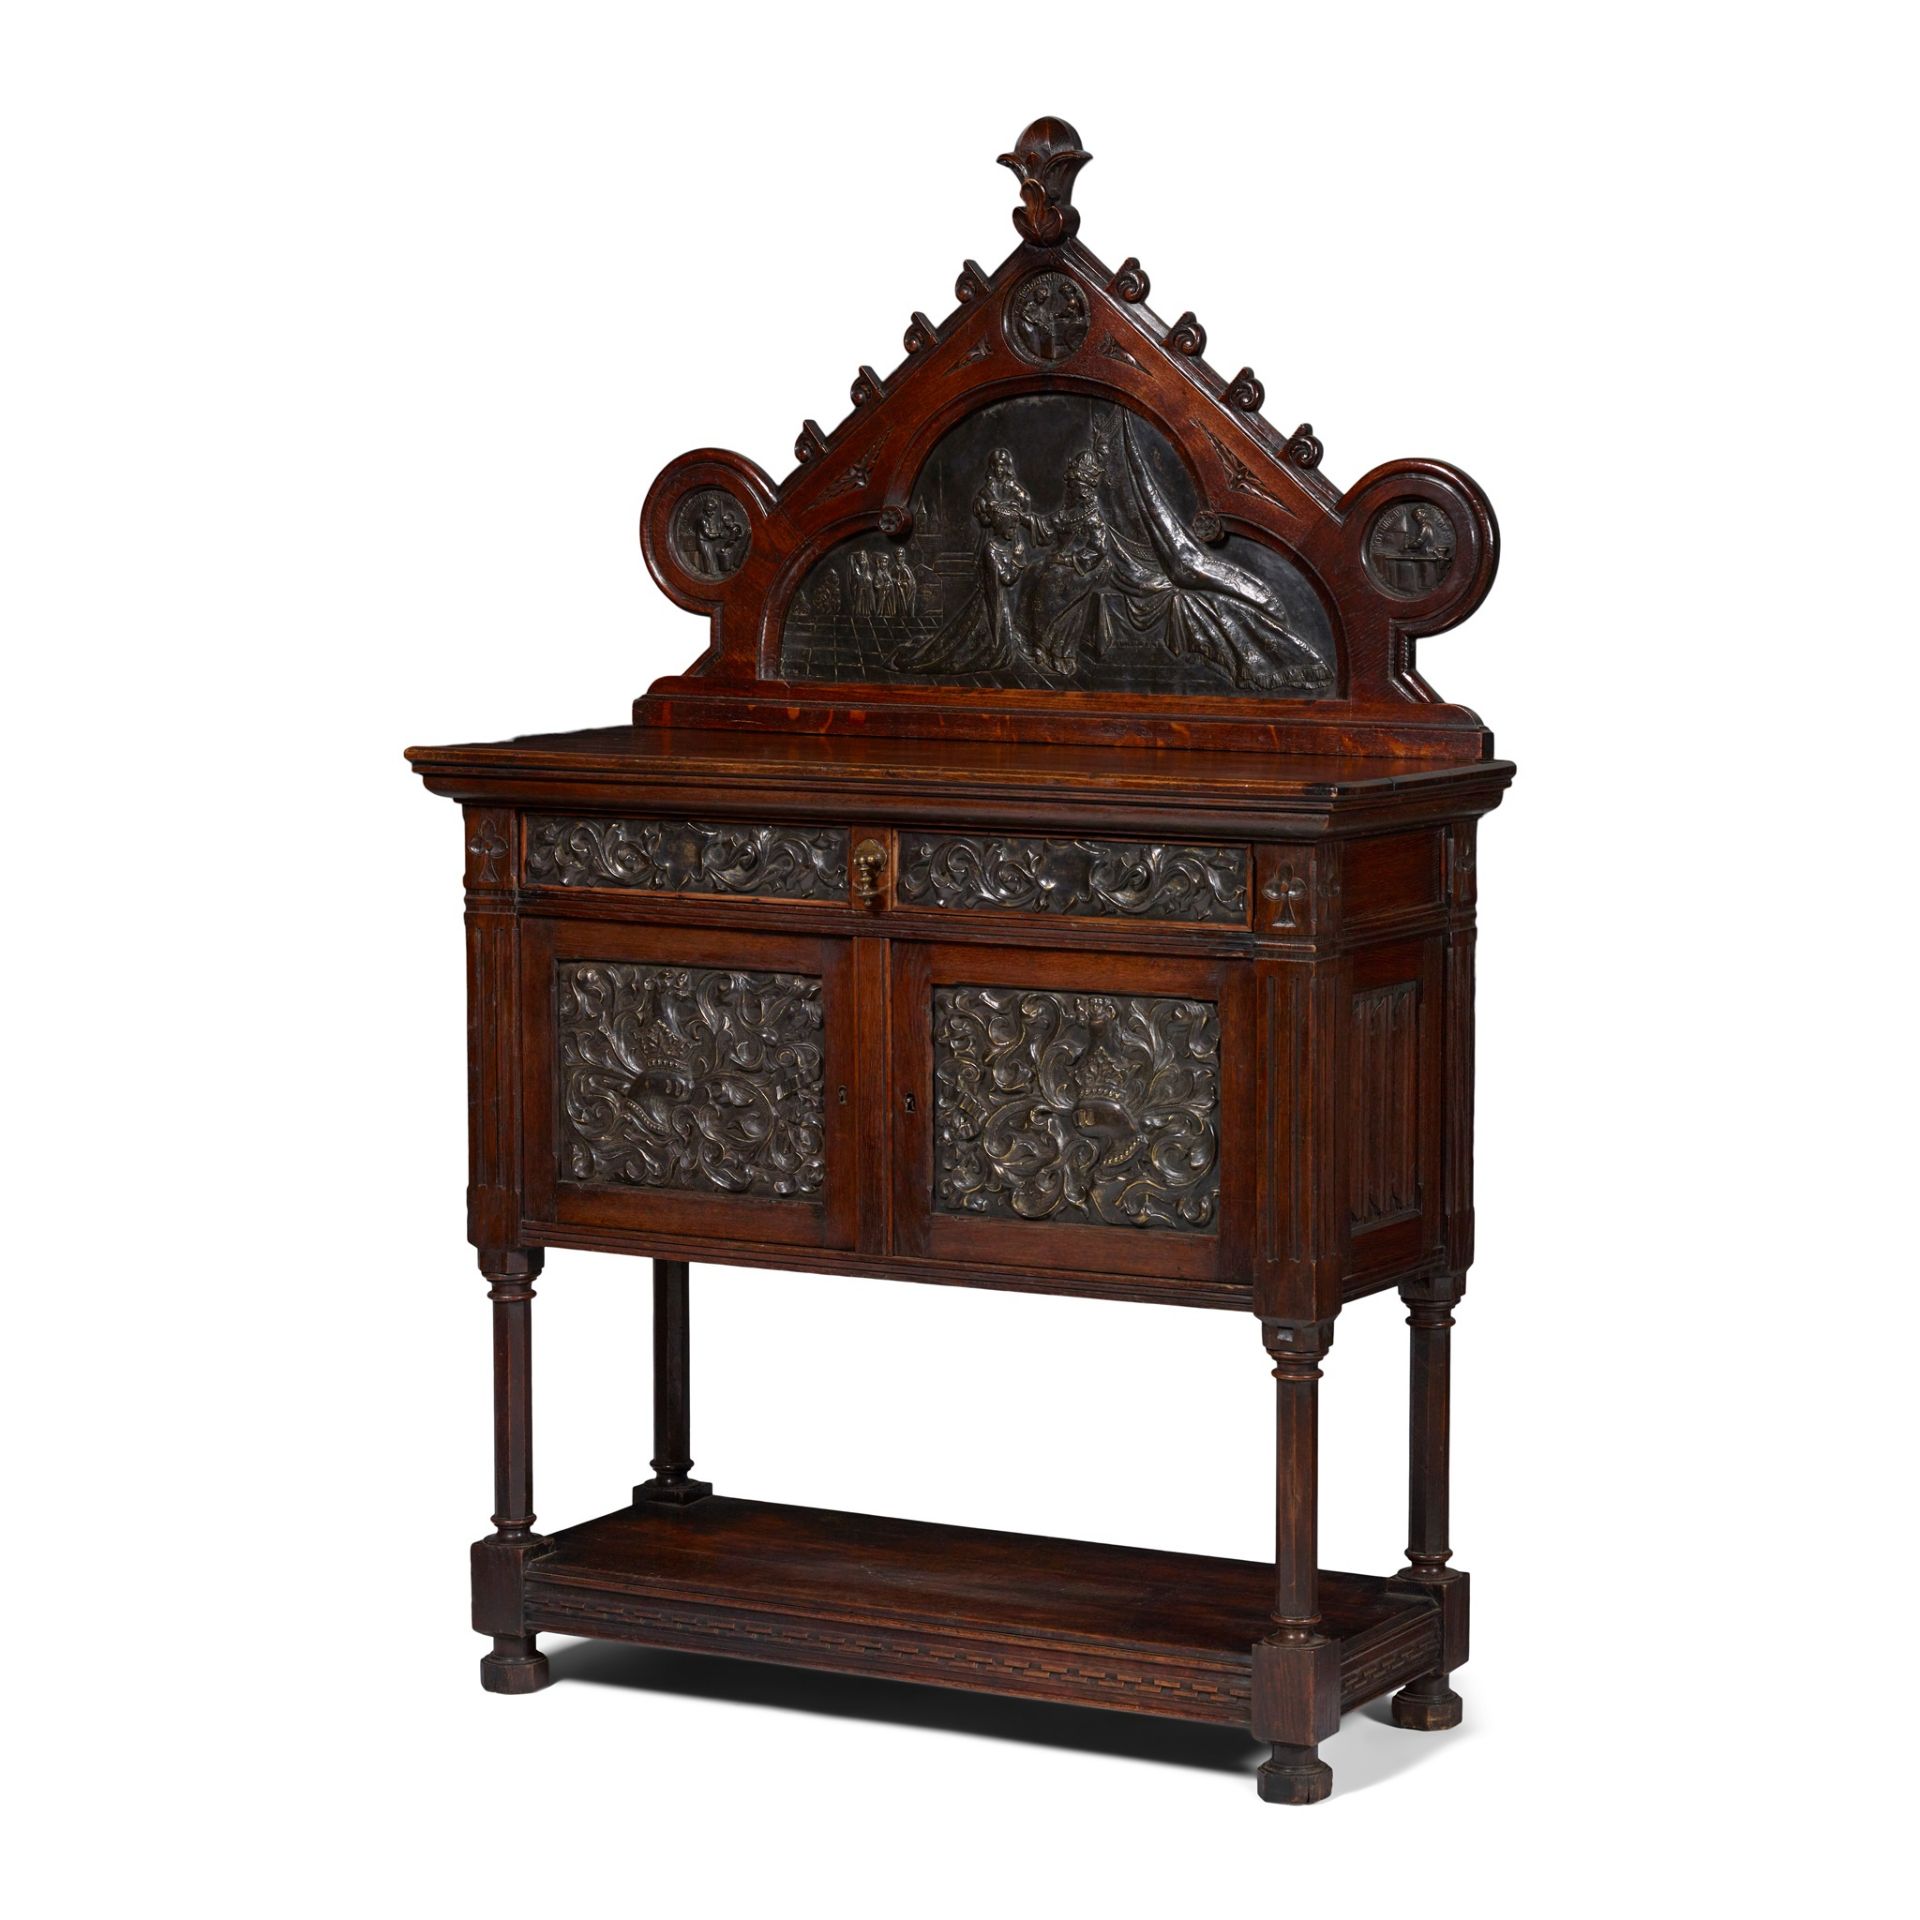 COX & SONS, LONDON (ATTRIBUTED MAKER) GOTHIC REVIVAL SIDE CABINET, CIRCA 1870 - Image 2 of 10